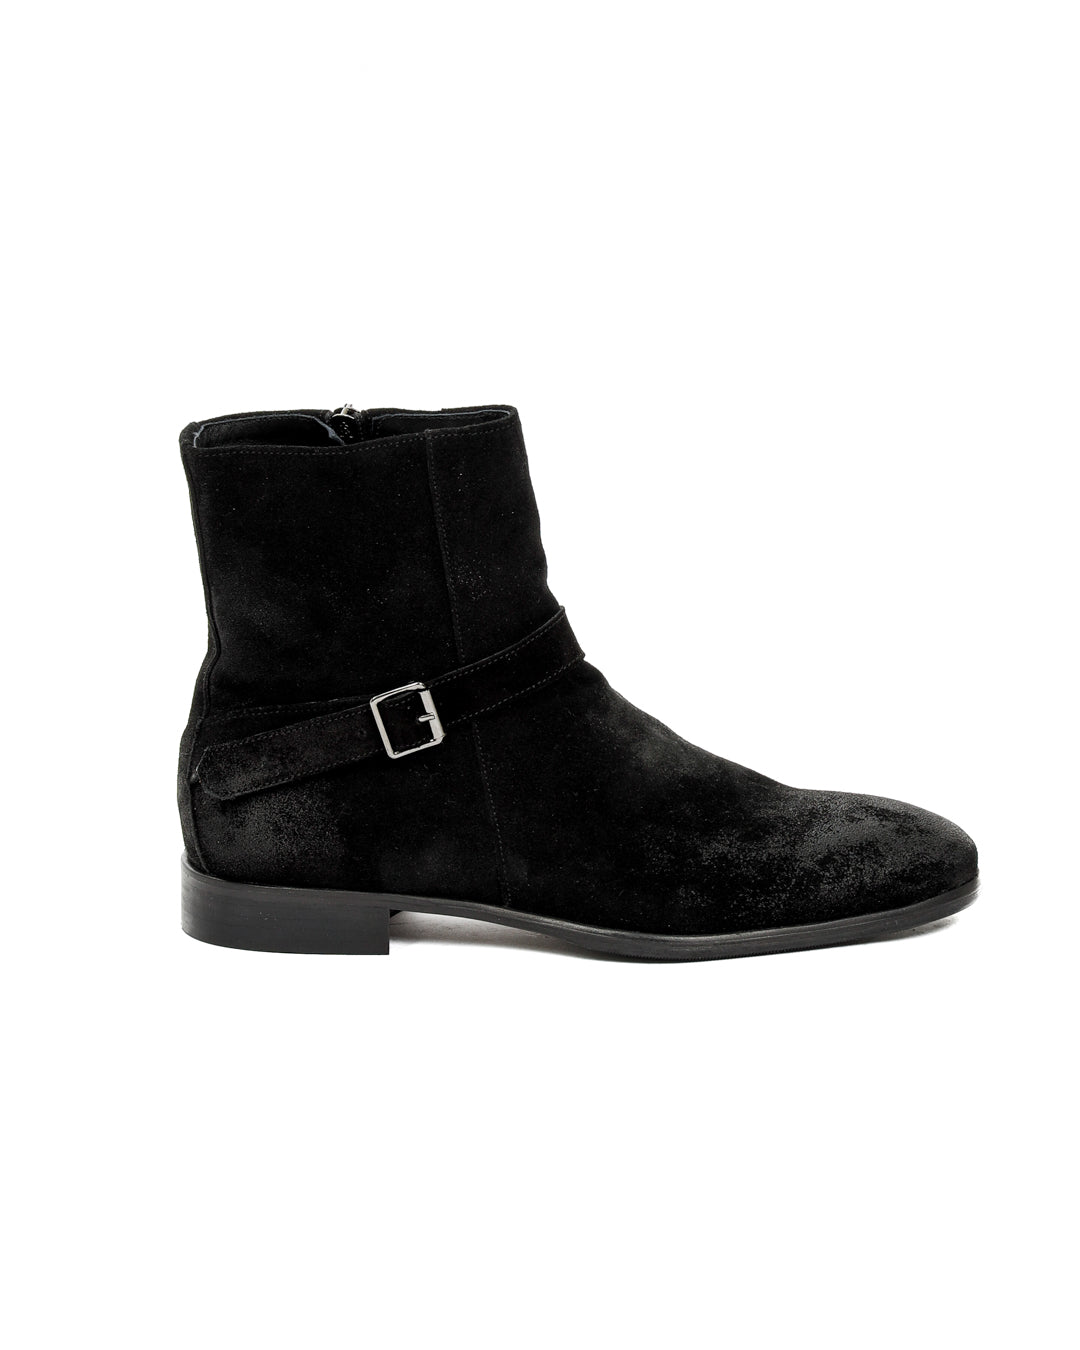 Neil - black suede ankle boot with strap